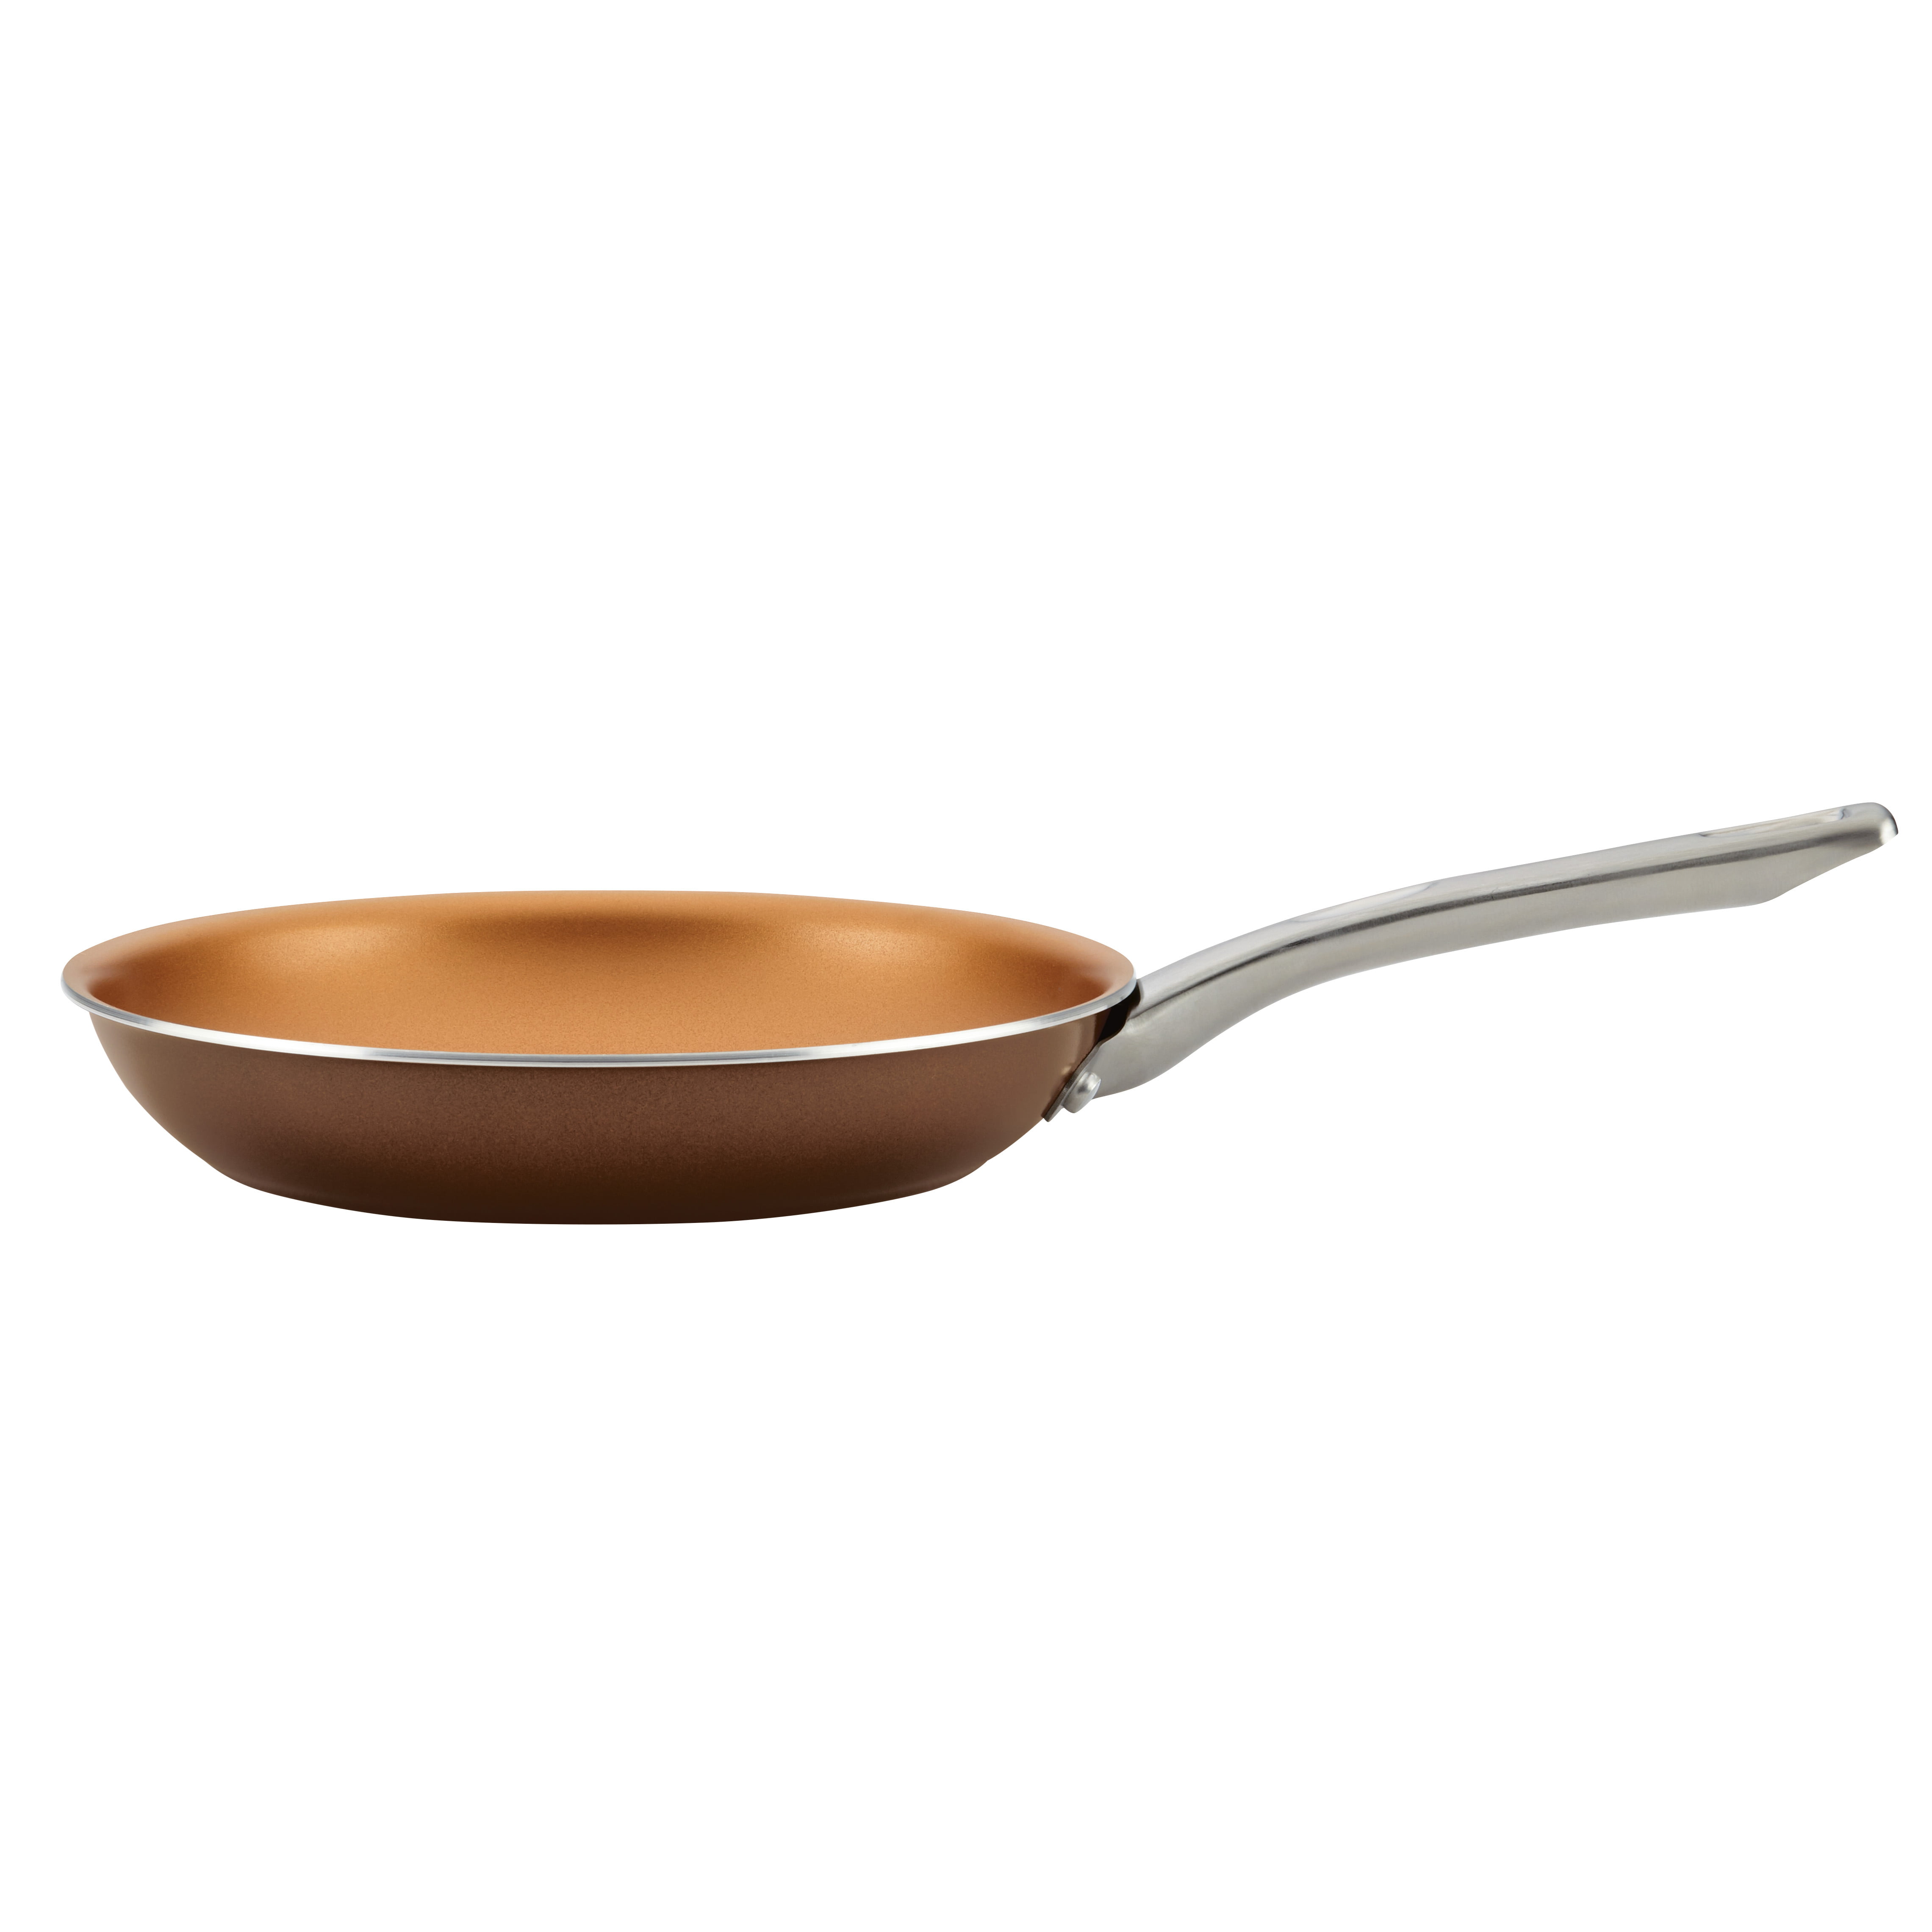 Ayesha Curry Ayesha Home Collection Porcelain Enamel Nonstick Cookware Set,  10-Piece, Brown Sugar 10779 - The Home Depot